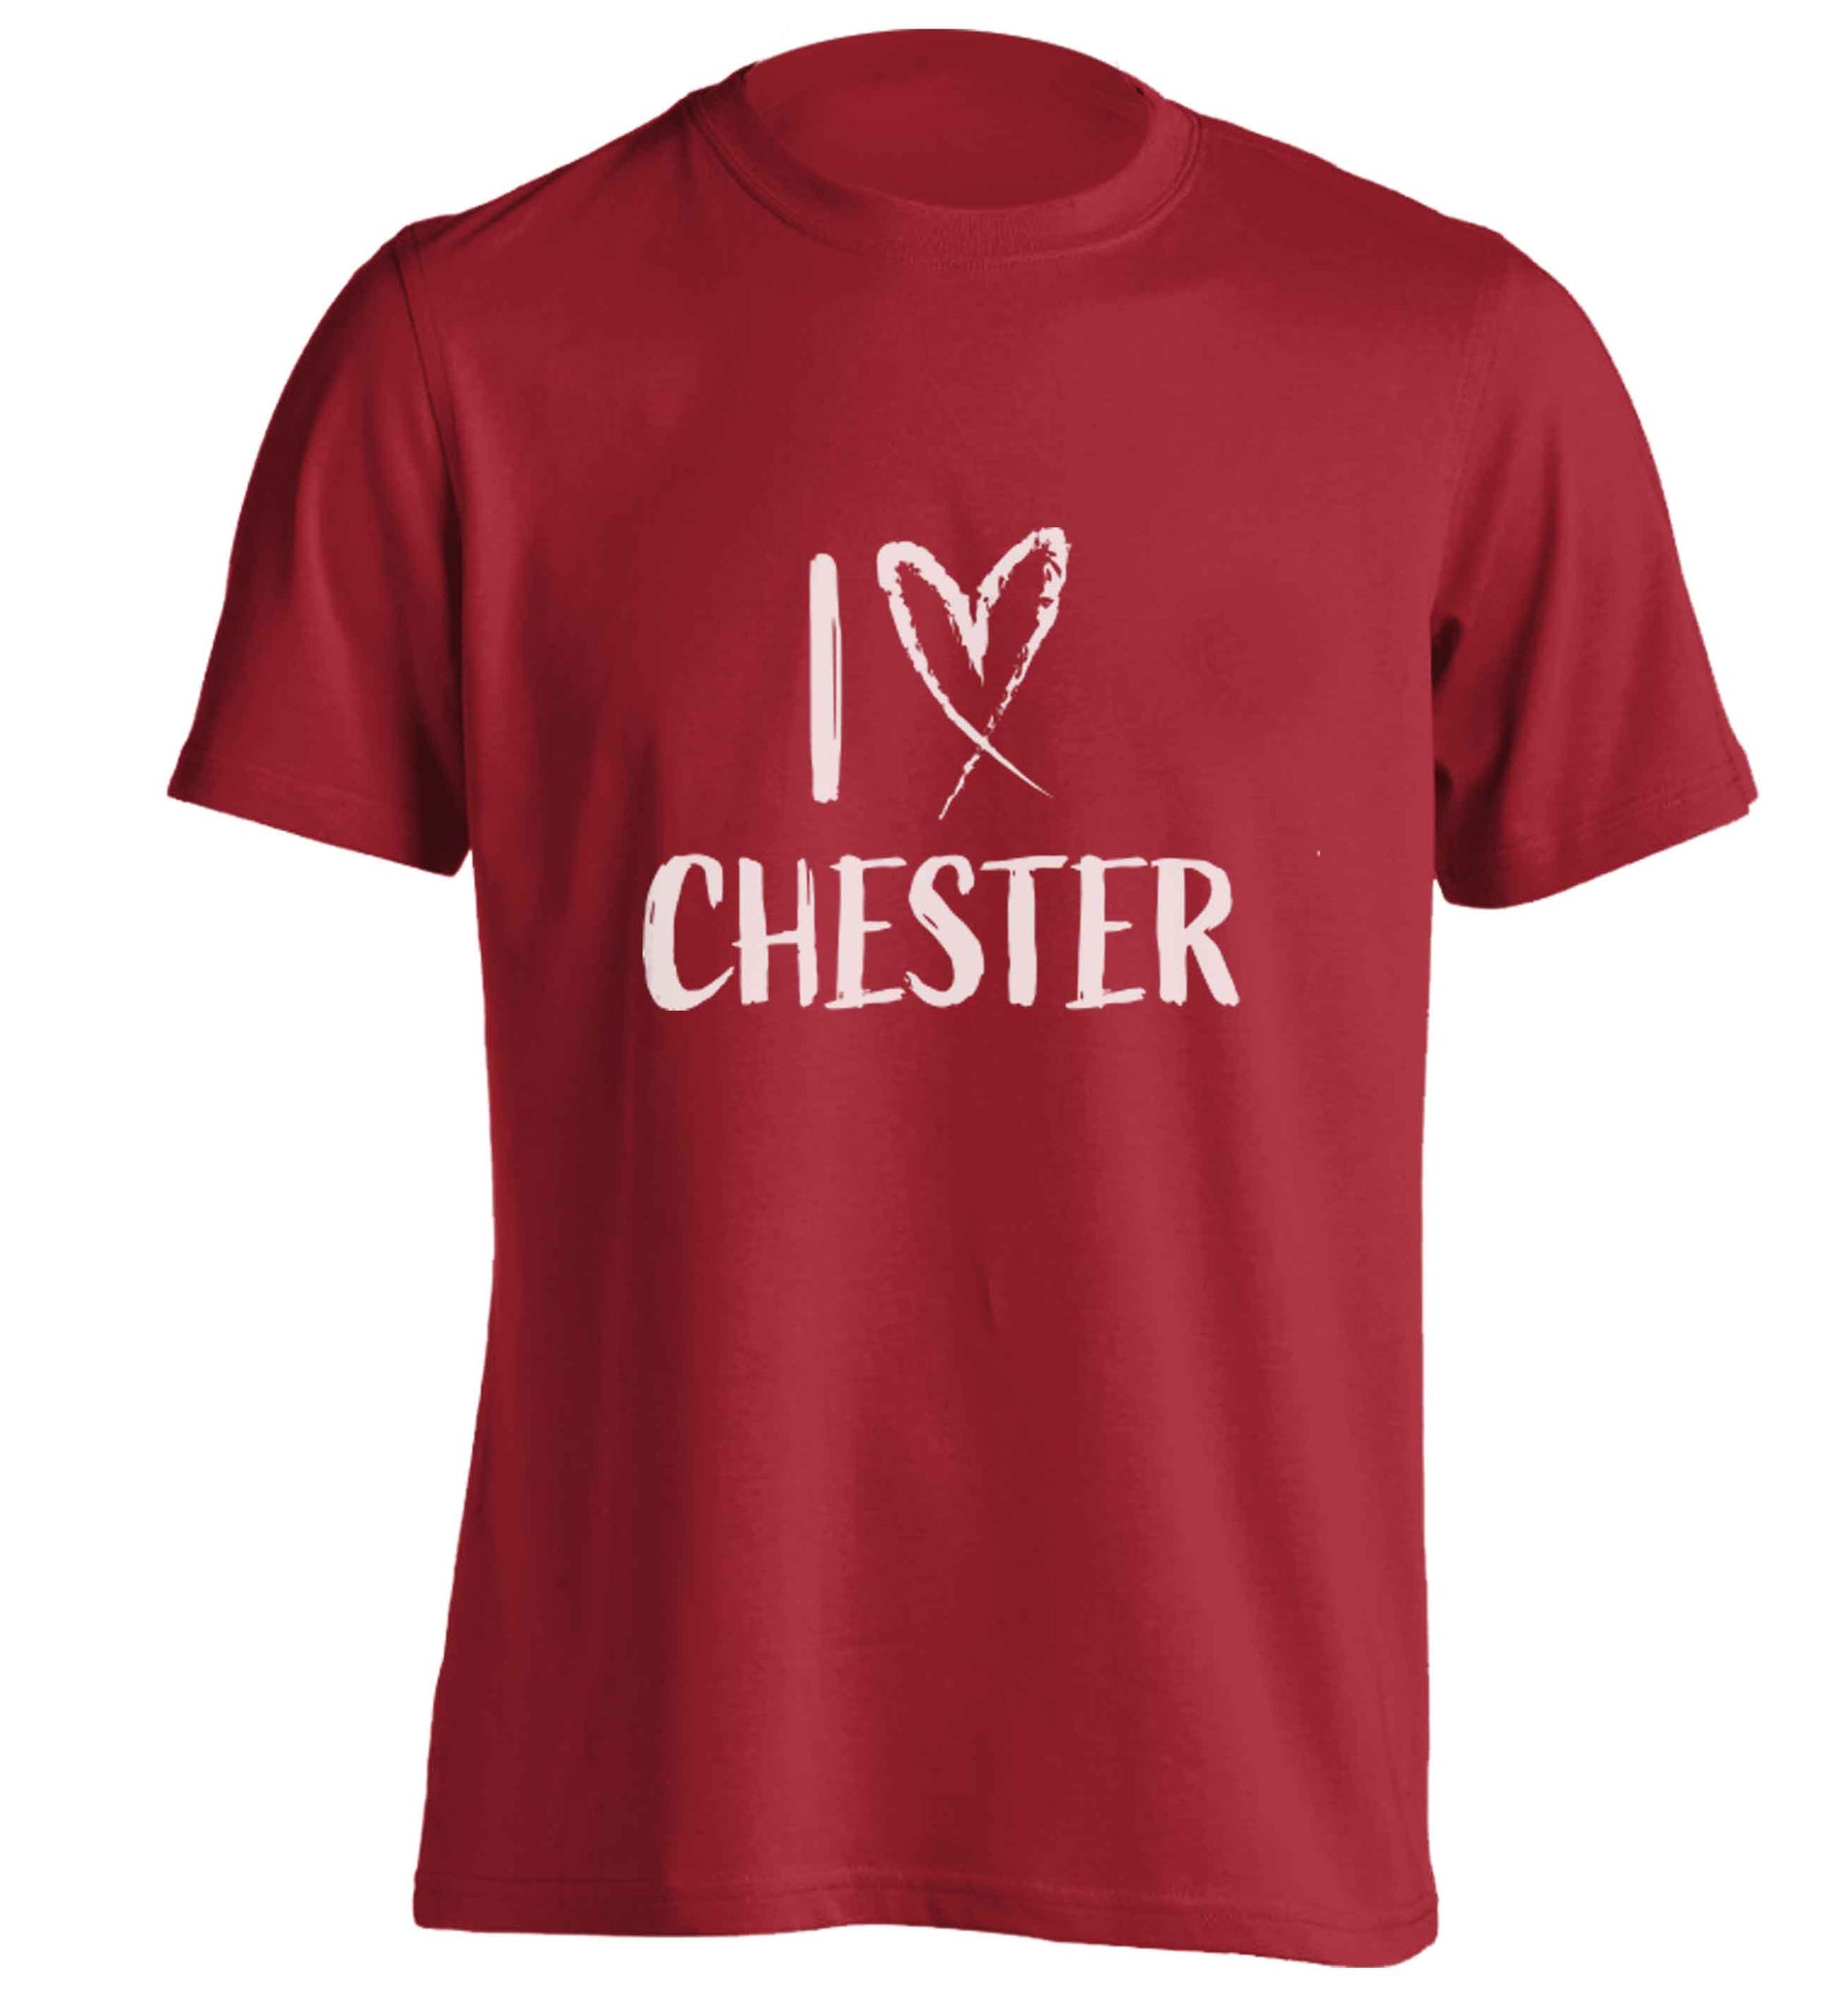 I love Chester adults unisex red Tshirt 2XL